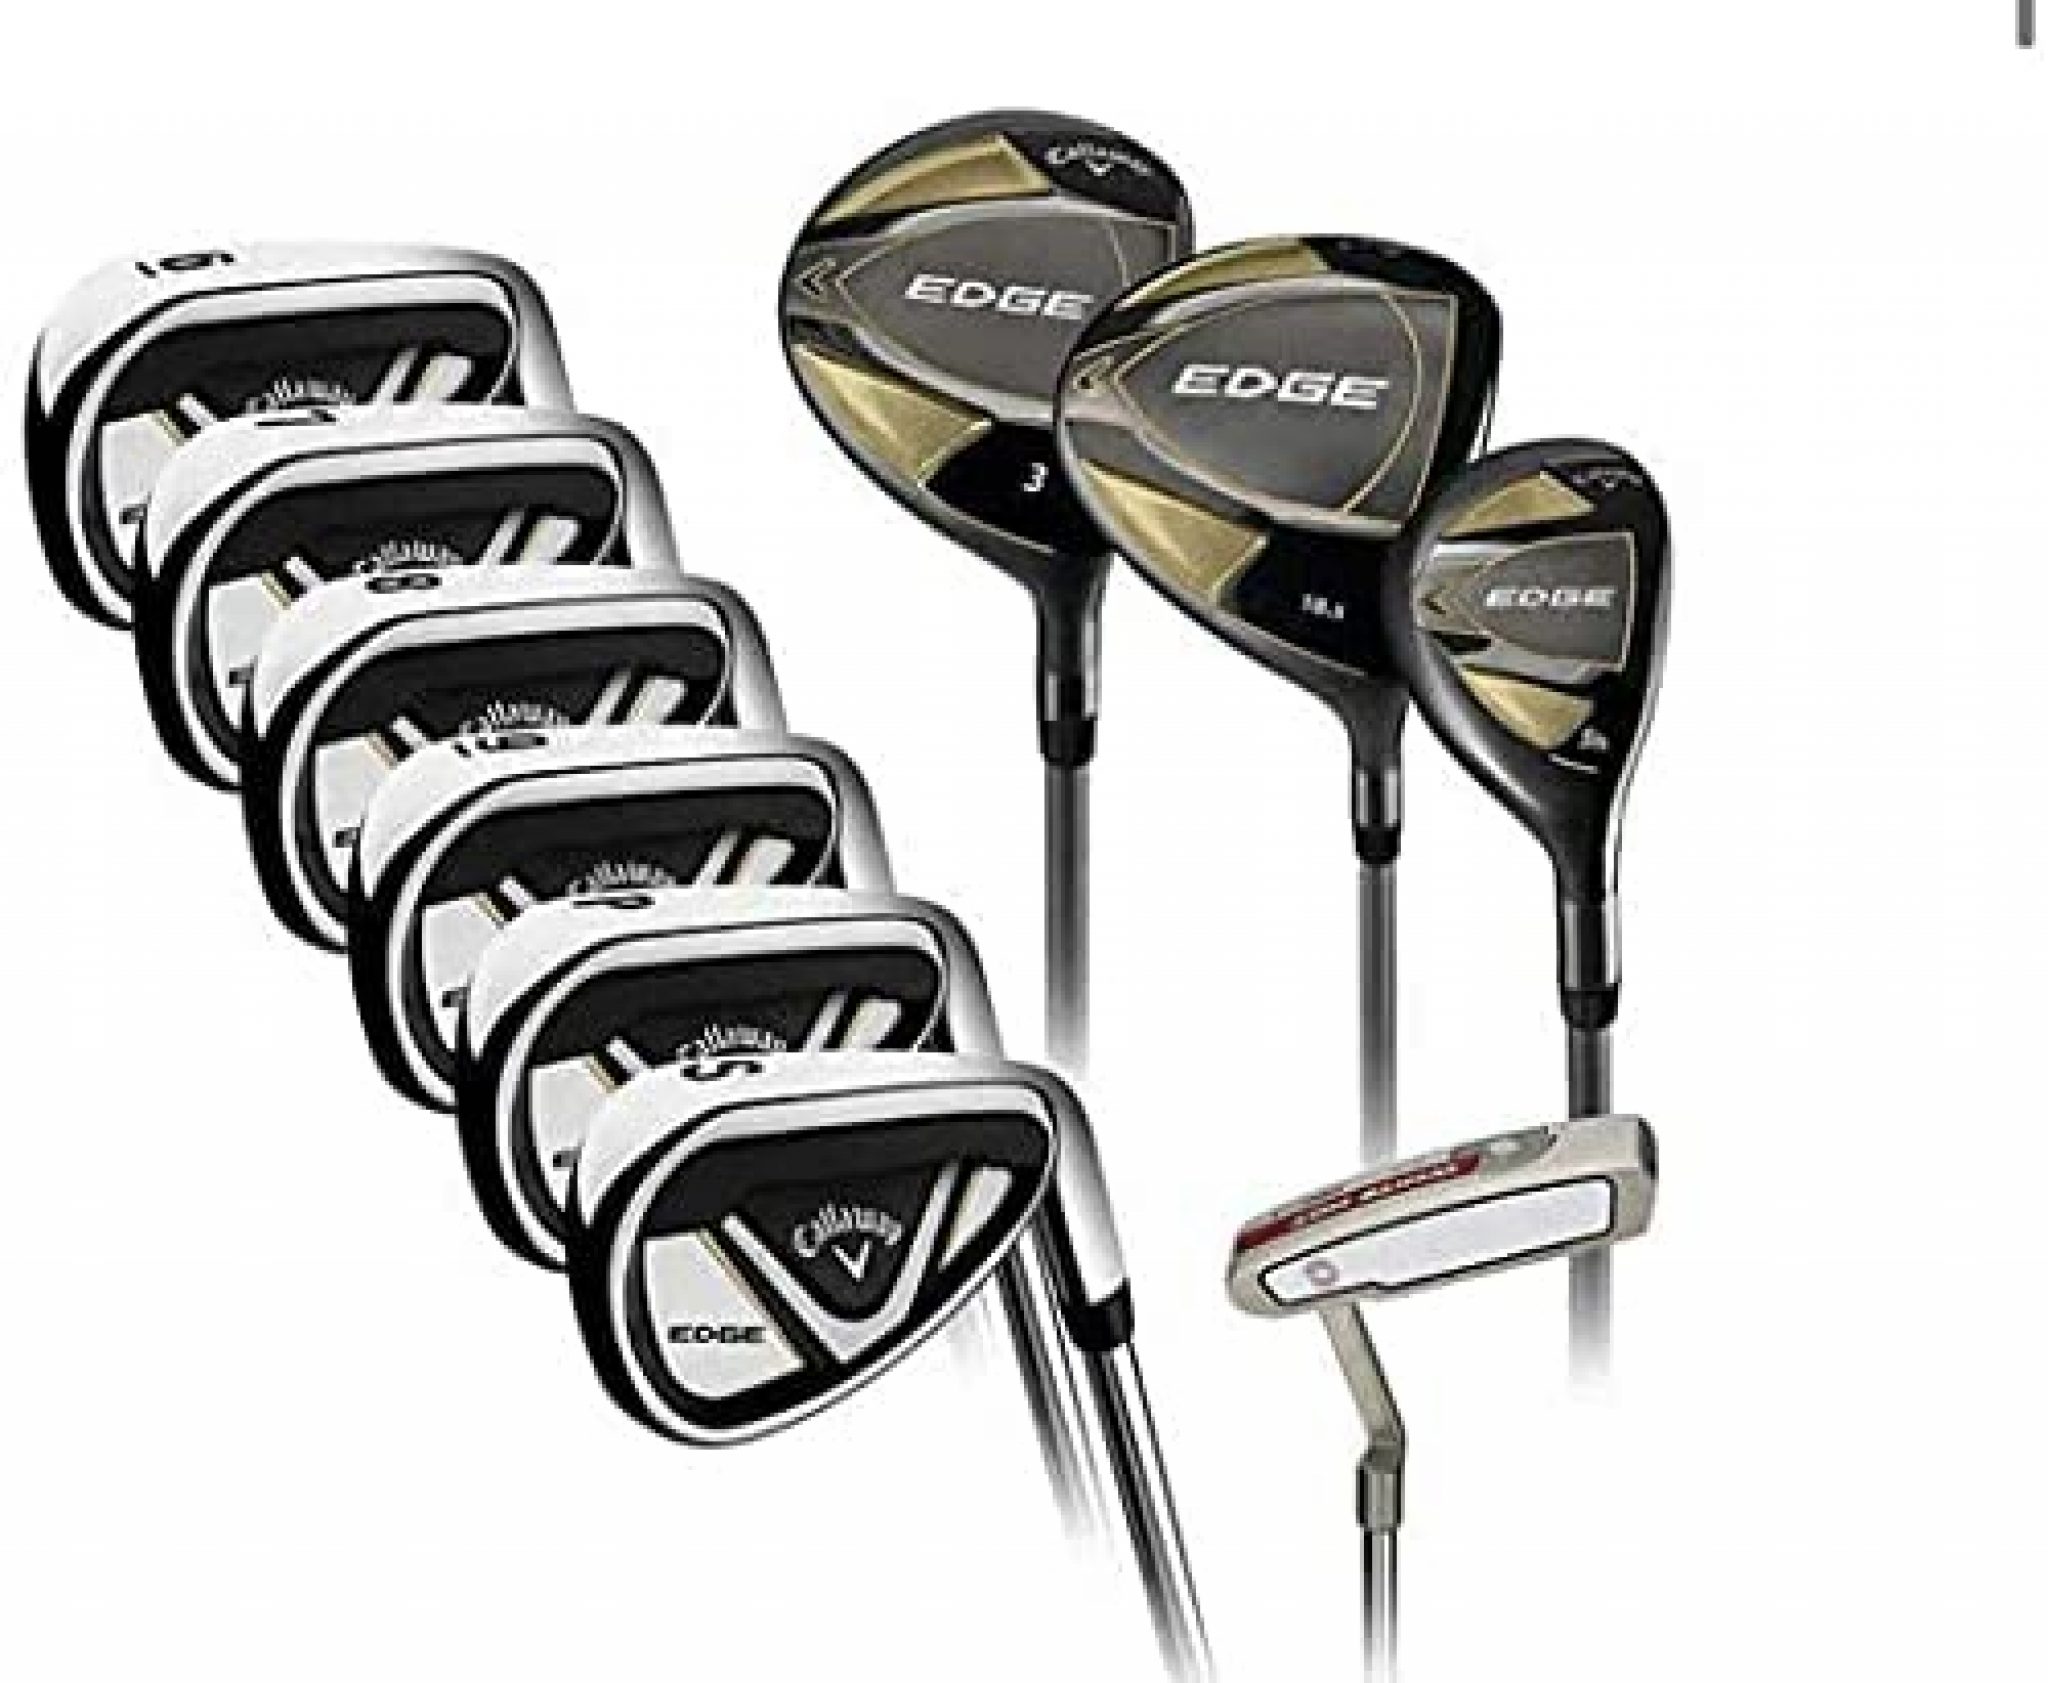 Callaway Edge 10Piece Golf Club Set, Left Handed Golf Products Review